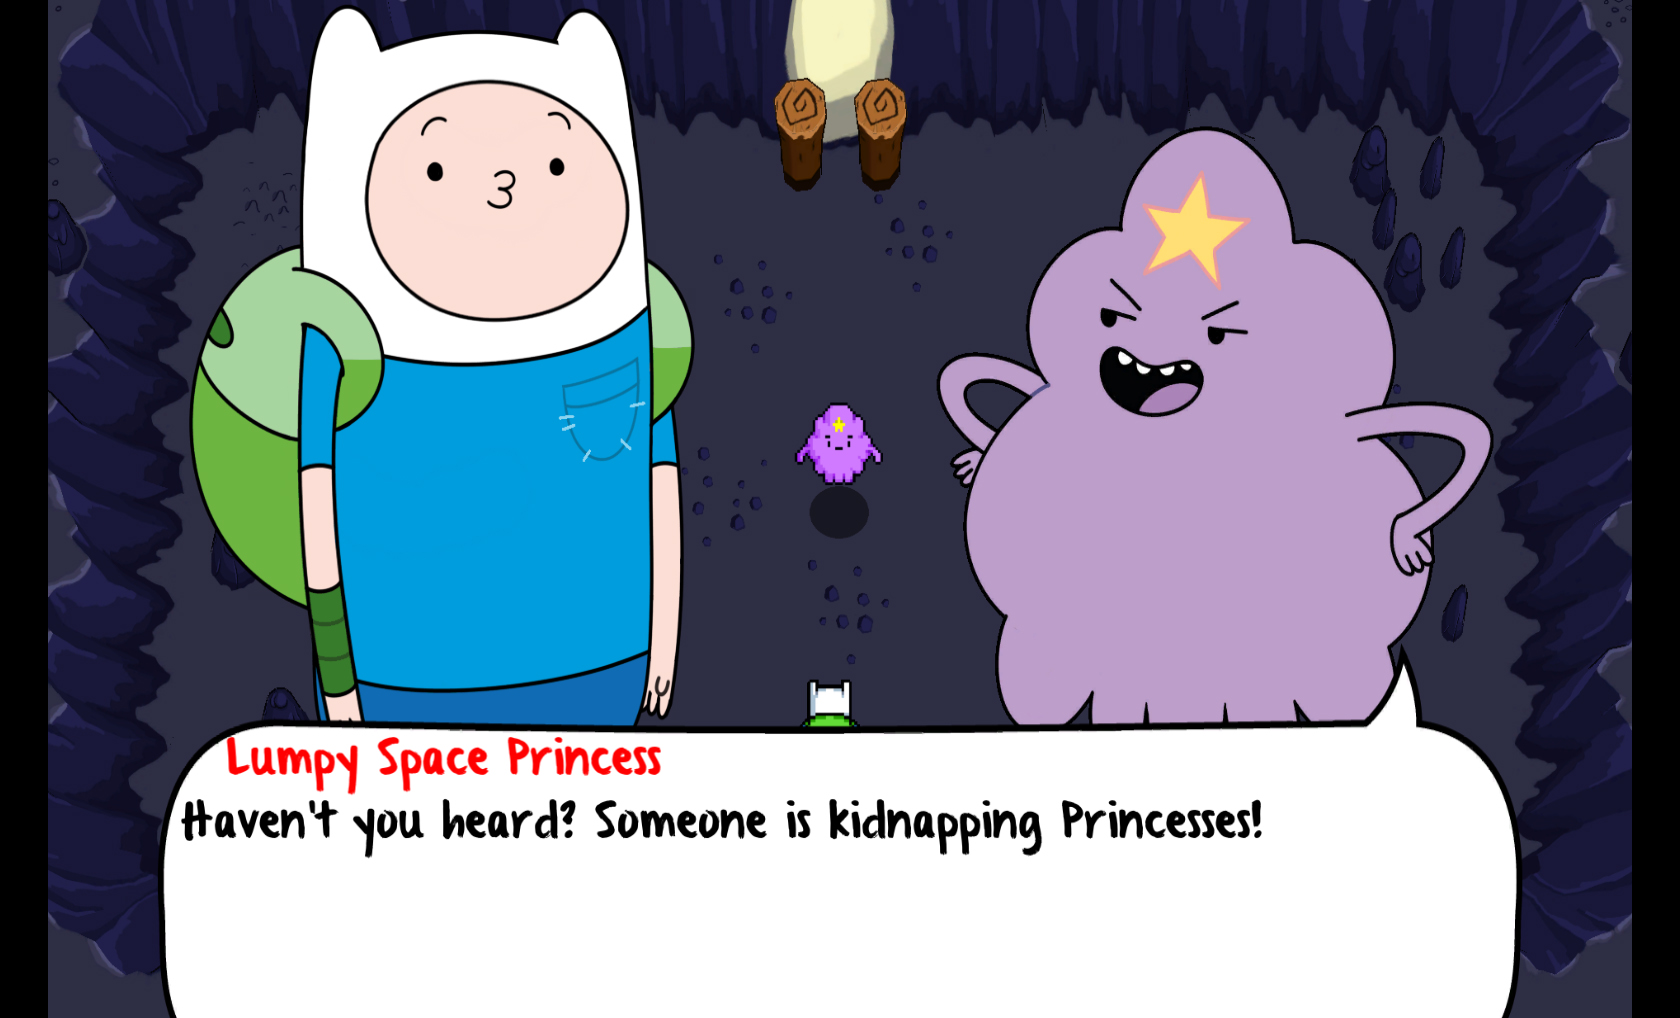 Adventure Time: The Secret Of The Nameless Kingdom Wallpapers